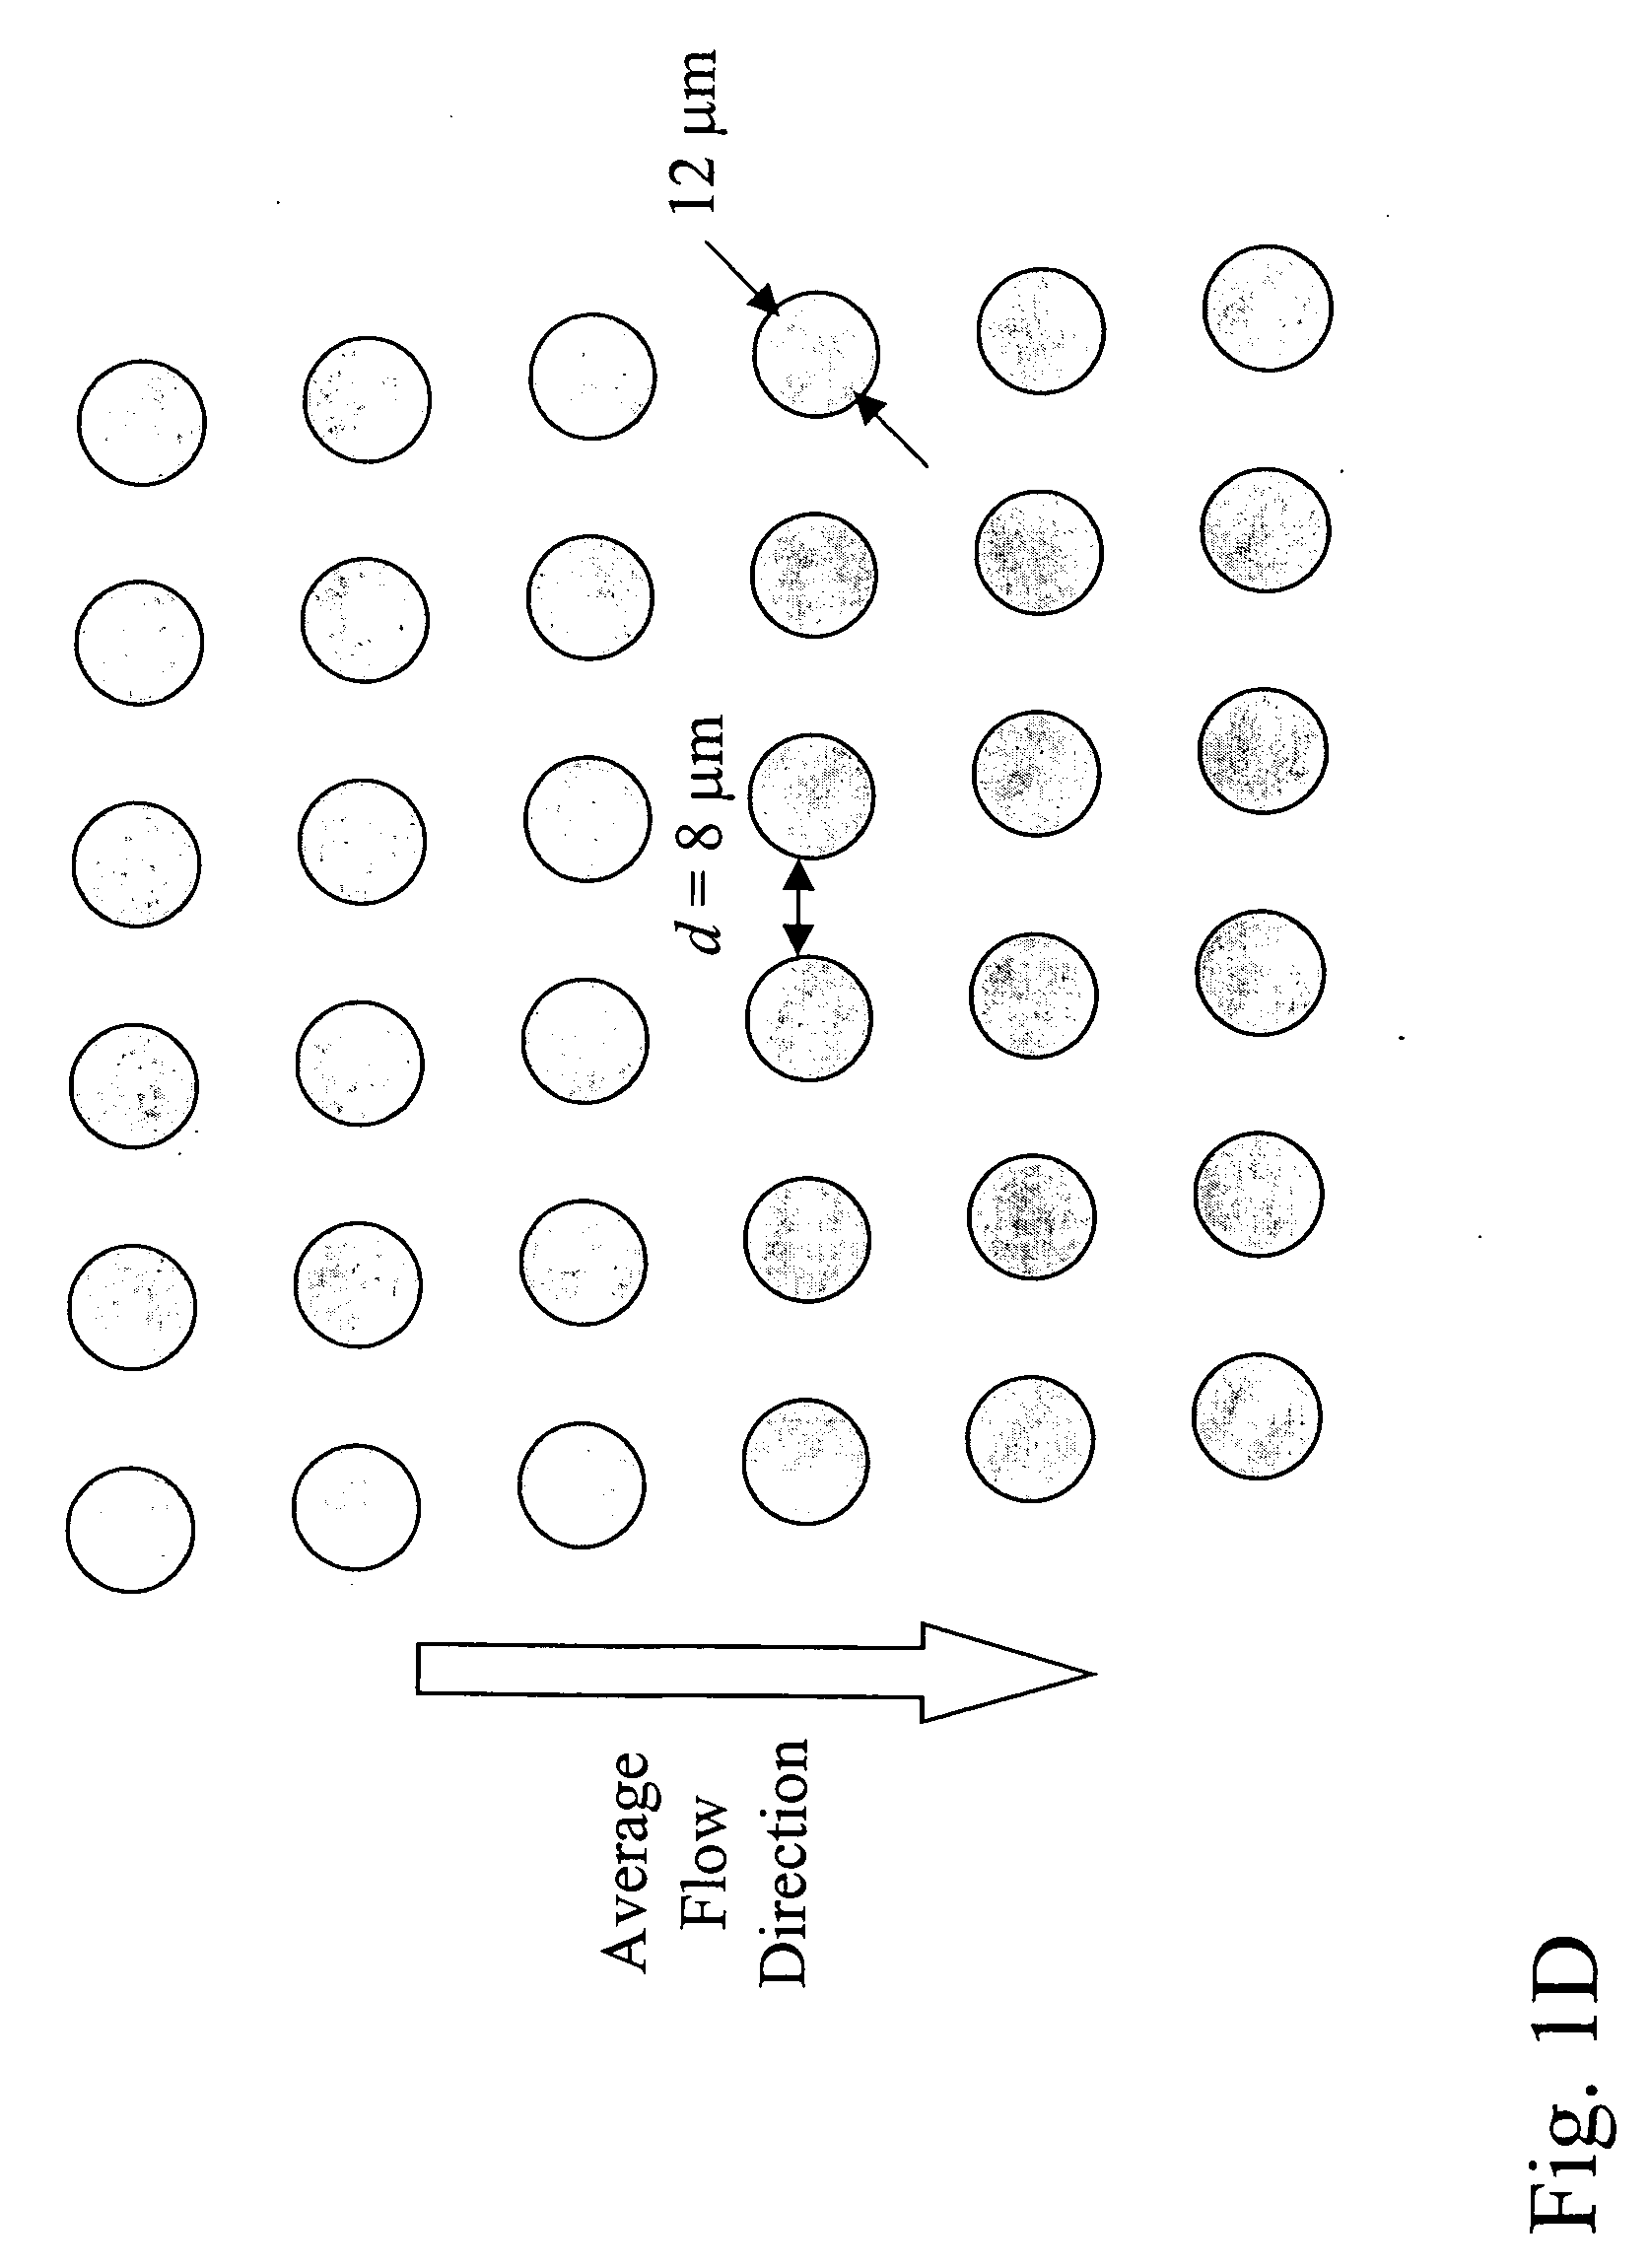 Devices and methods for magnetic enrichment of cells and other particles